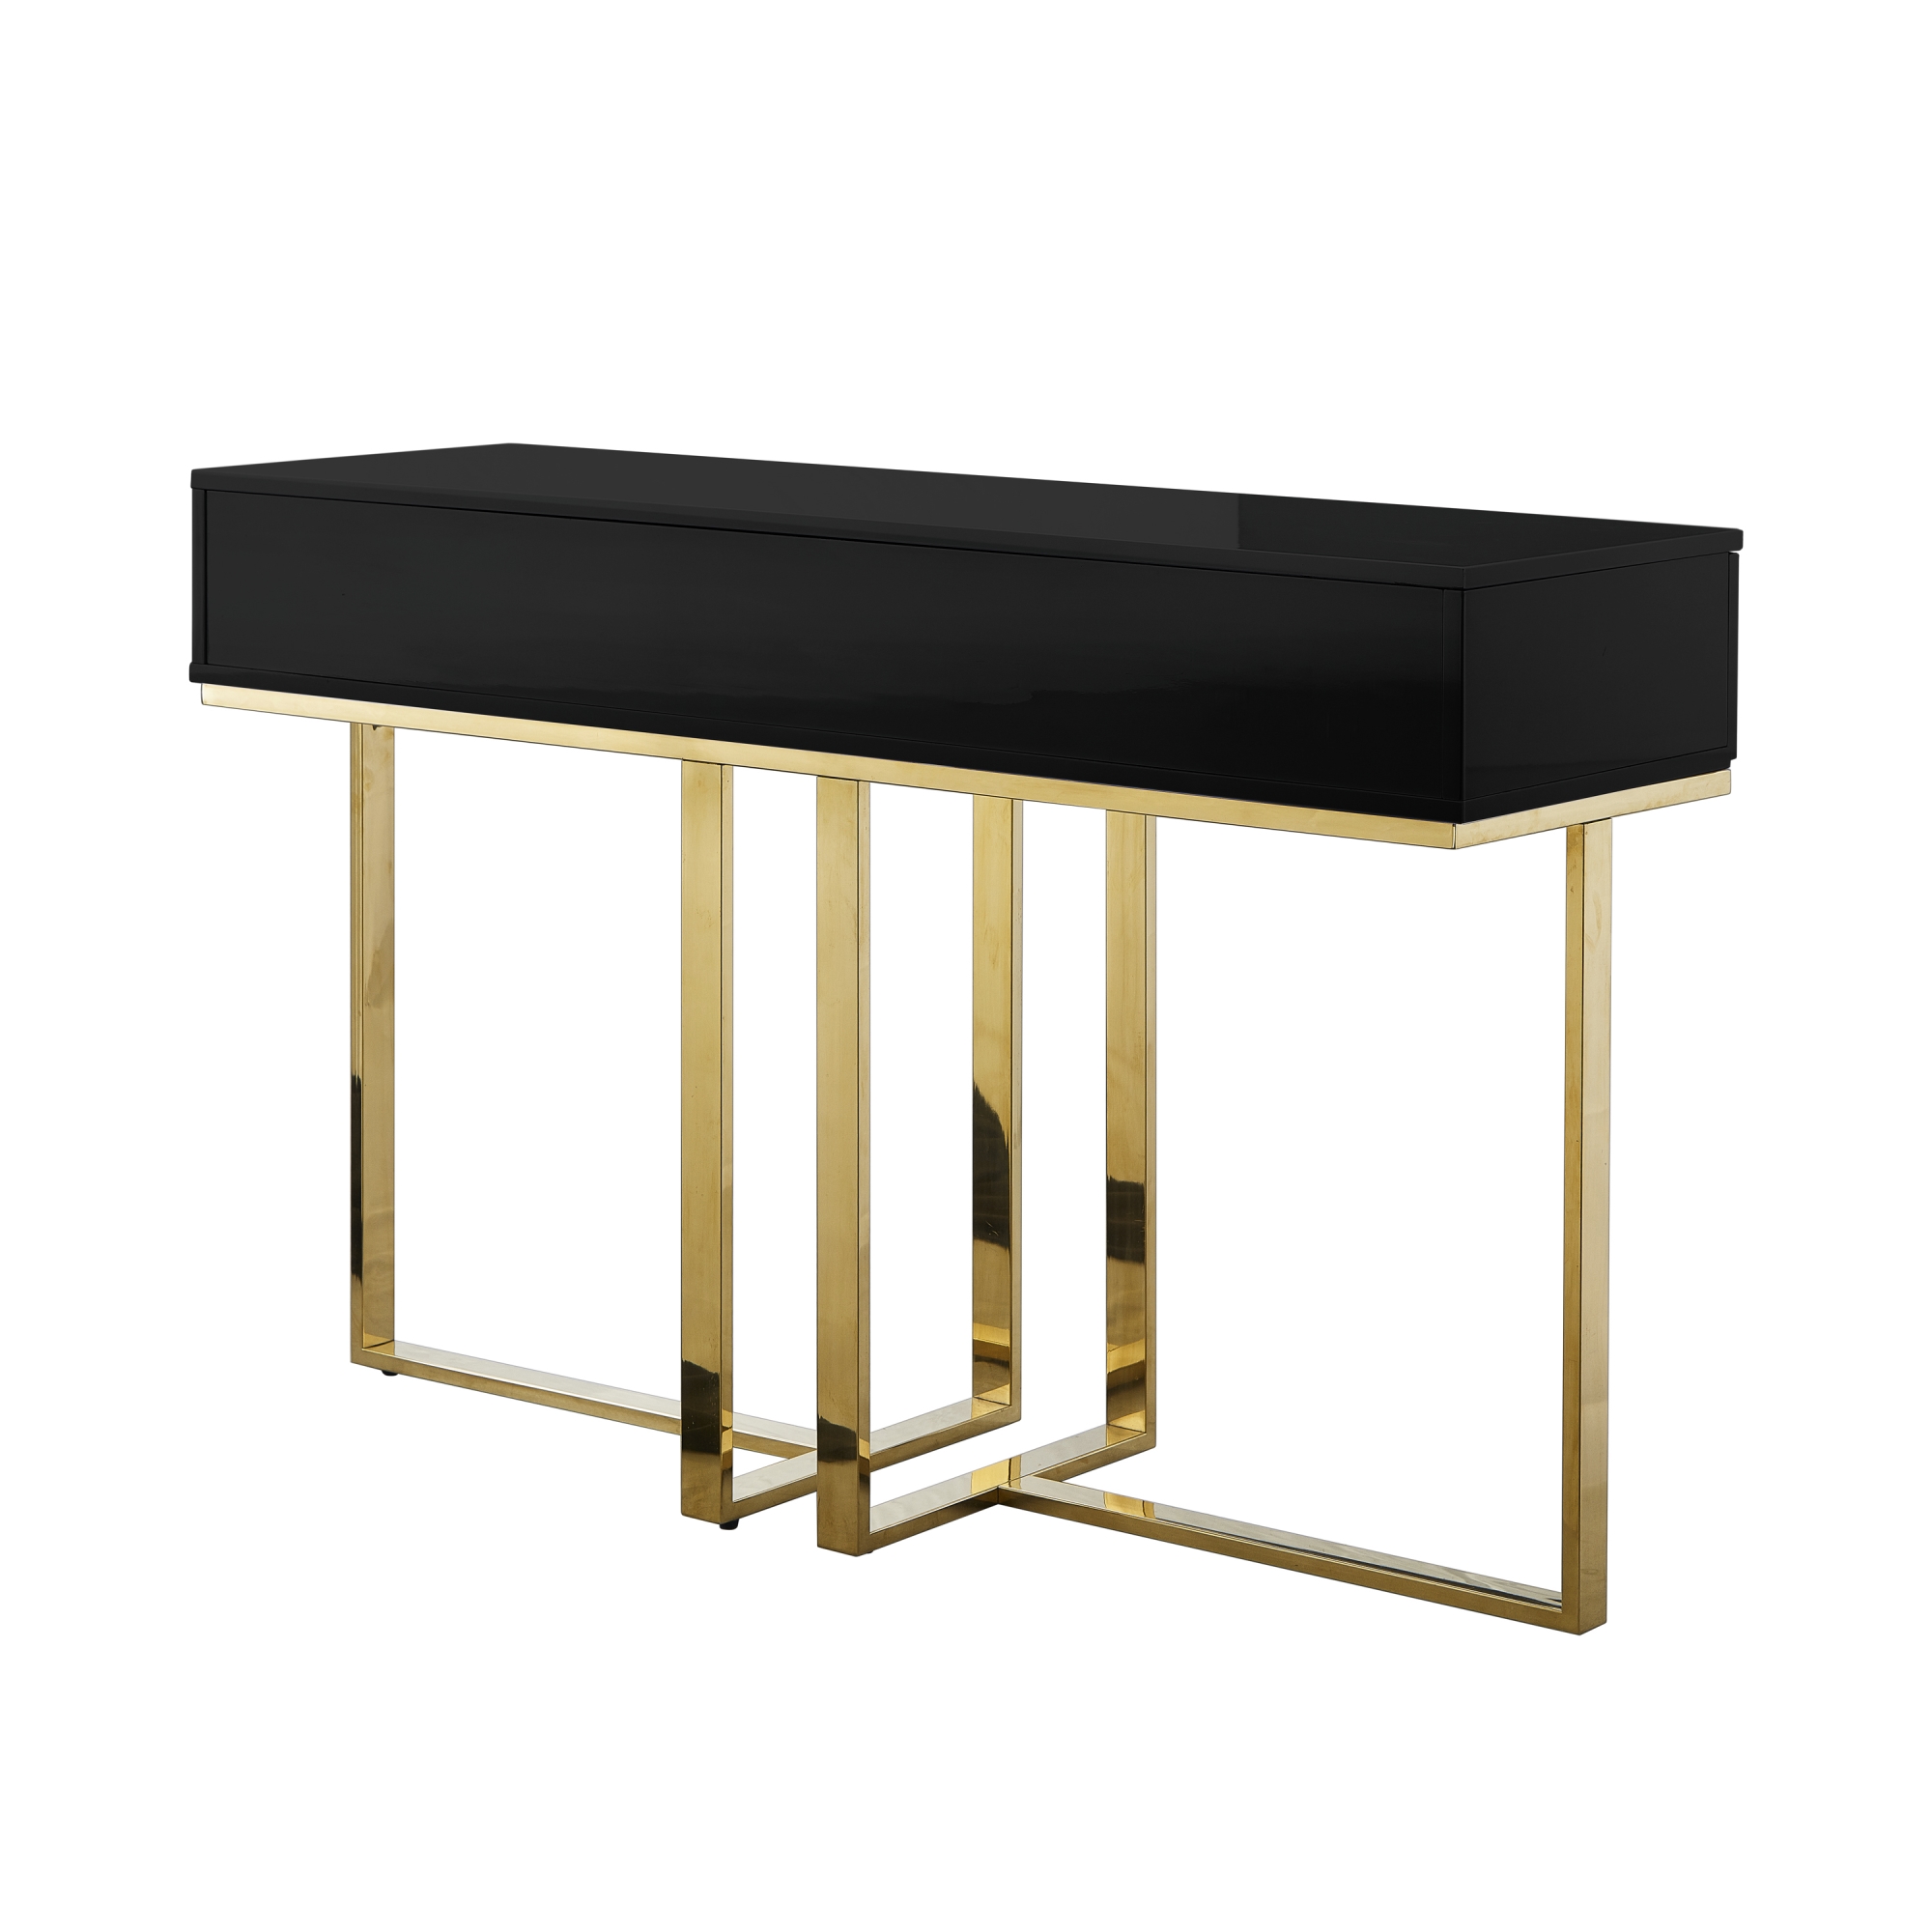 Nicole Miller Maui High Gloss Stainless Steel 2 Drawers Console Table